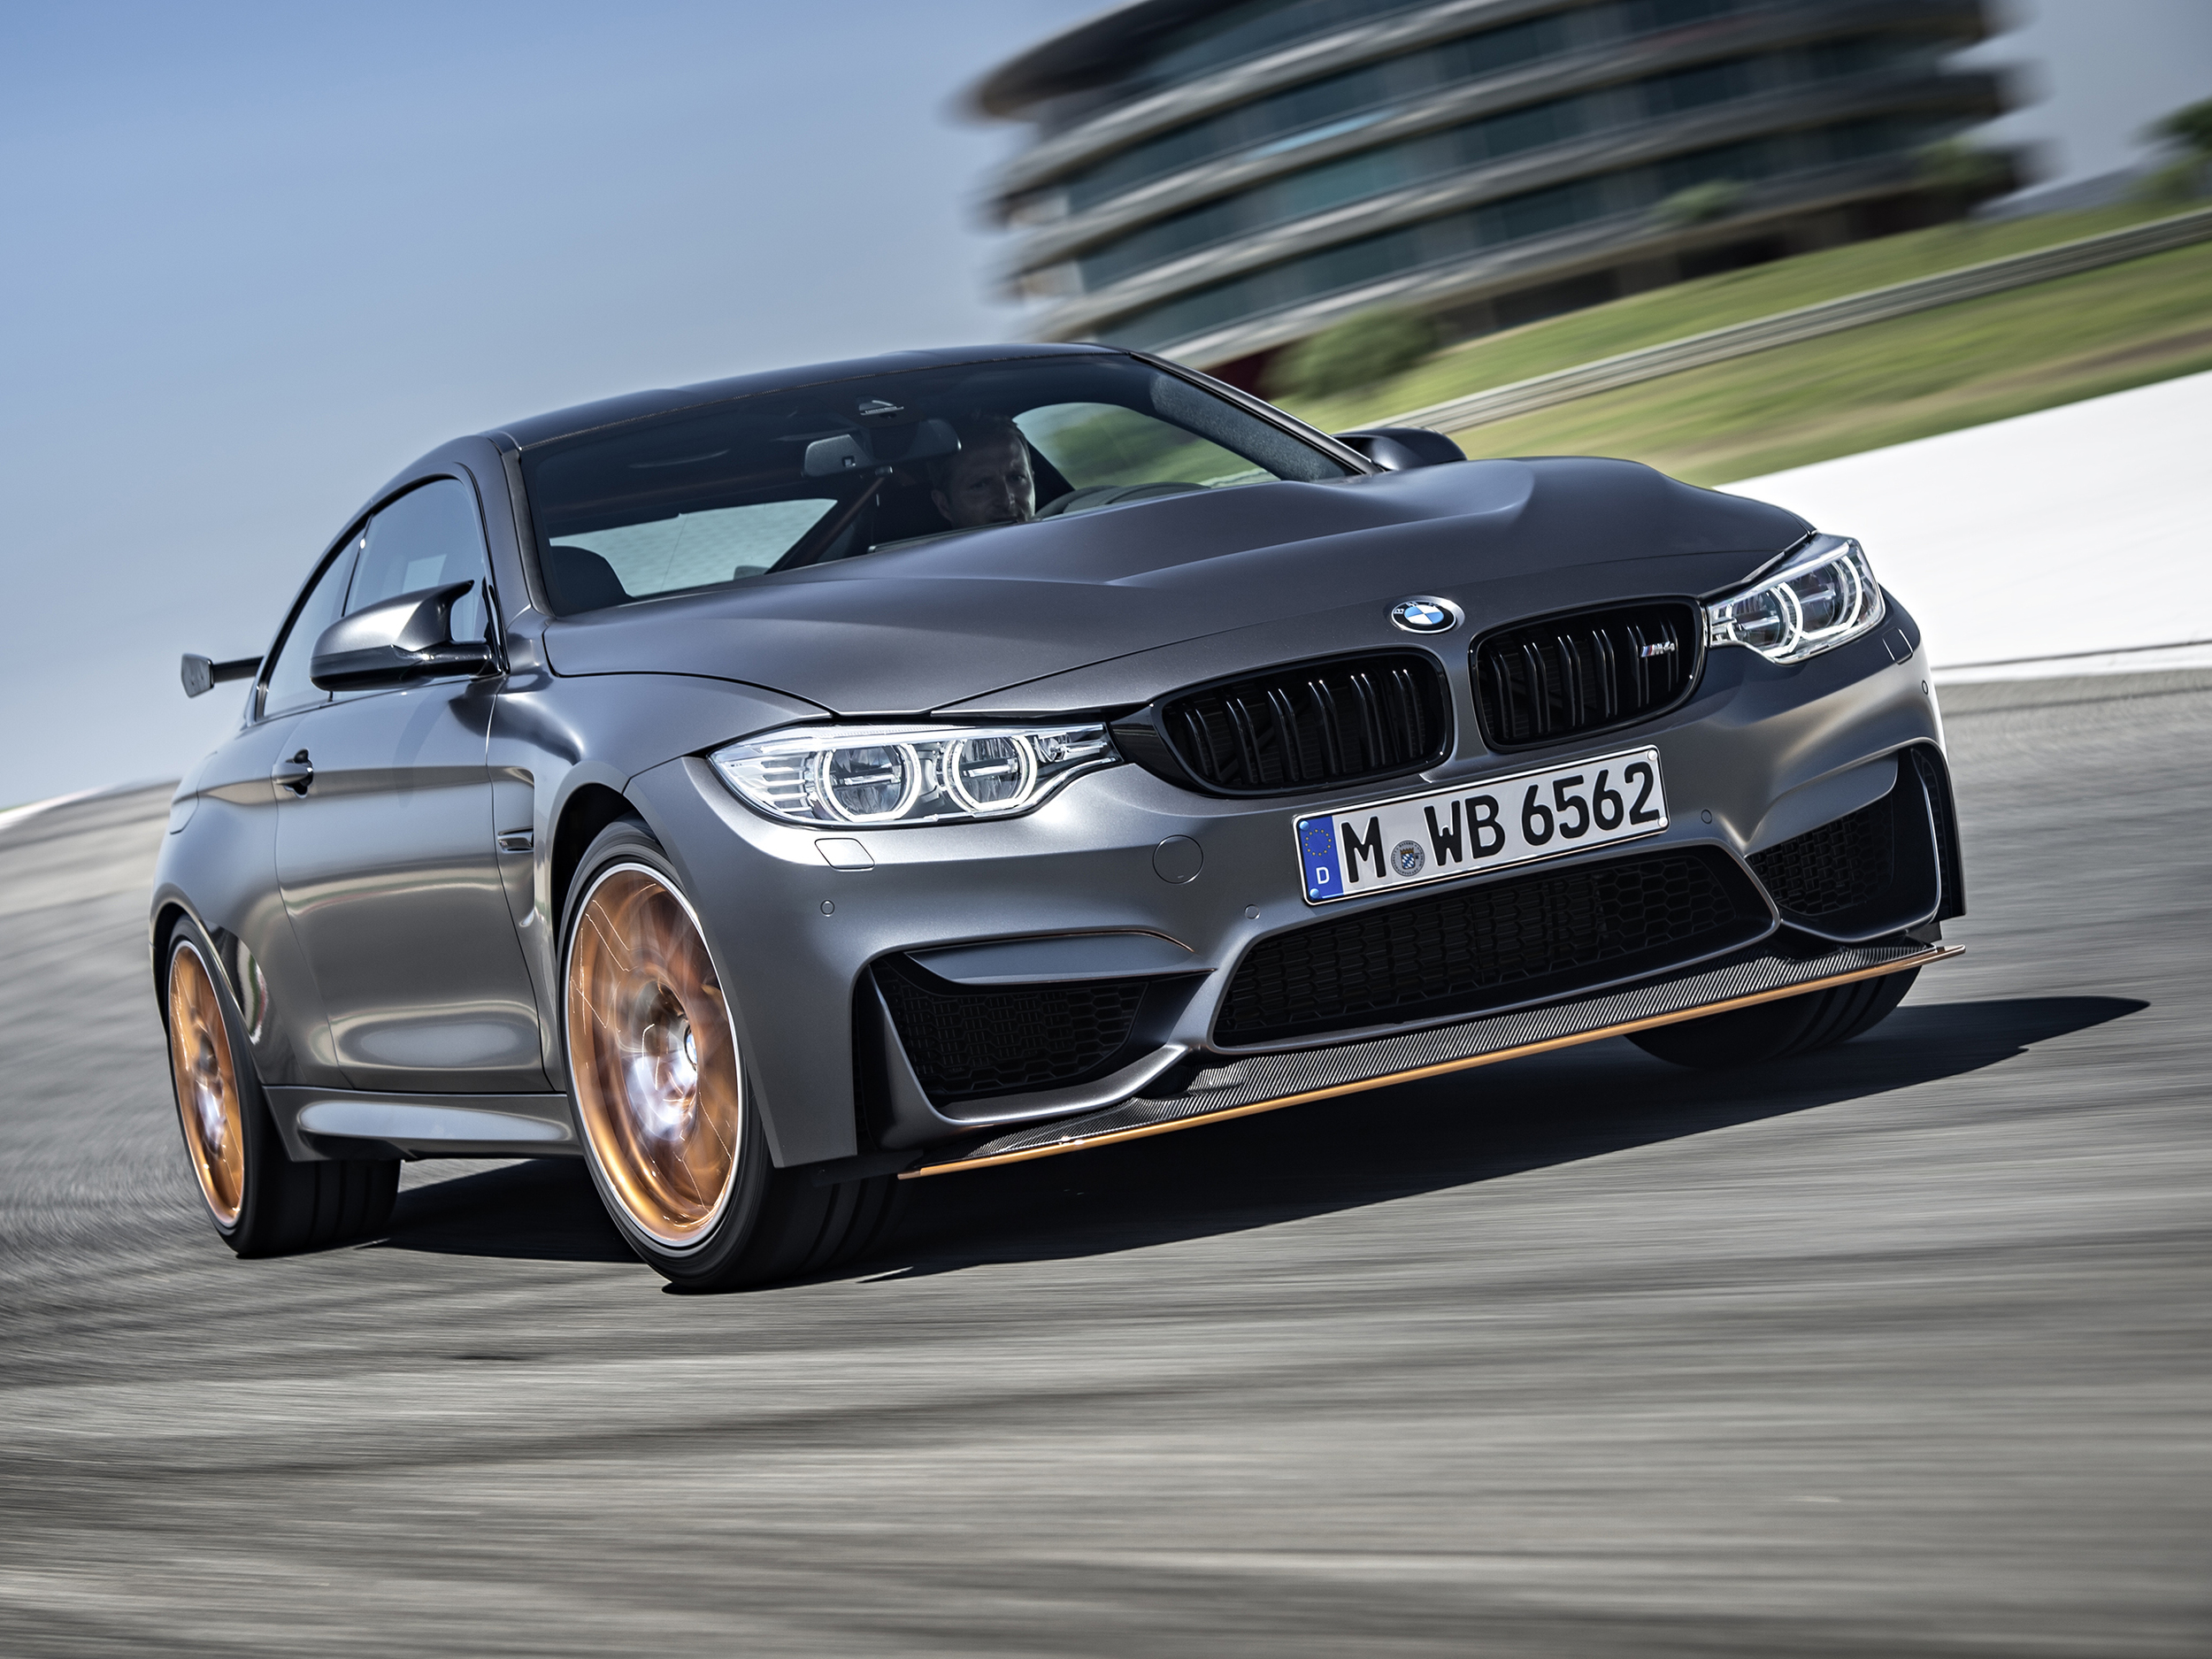 BMW confirms pricing for M4 GTS